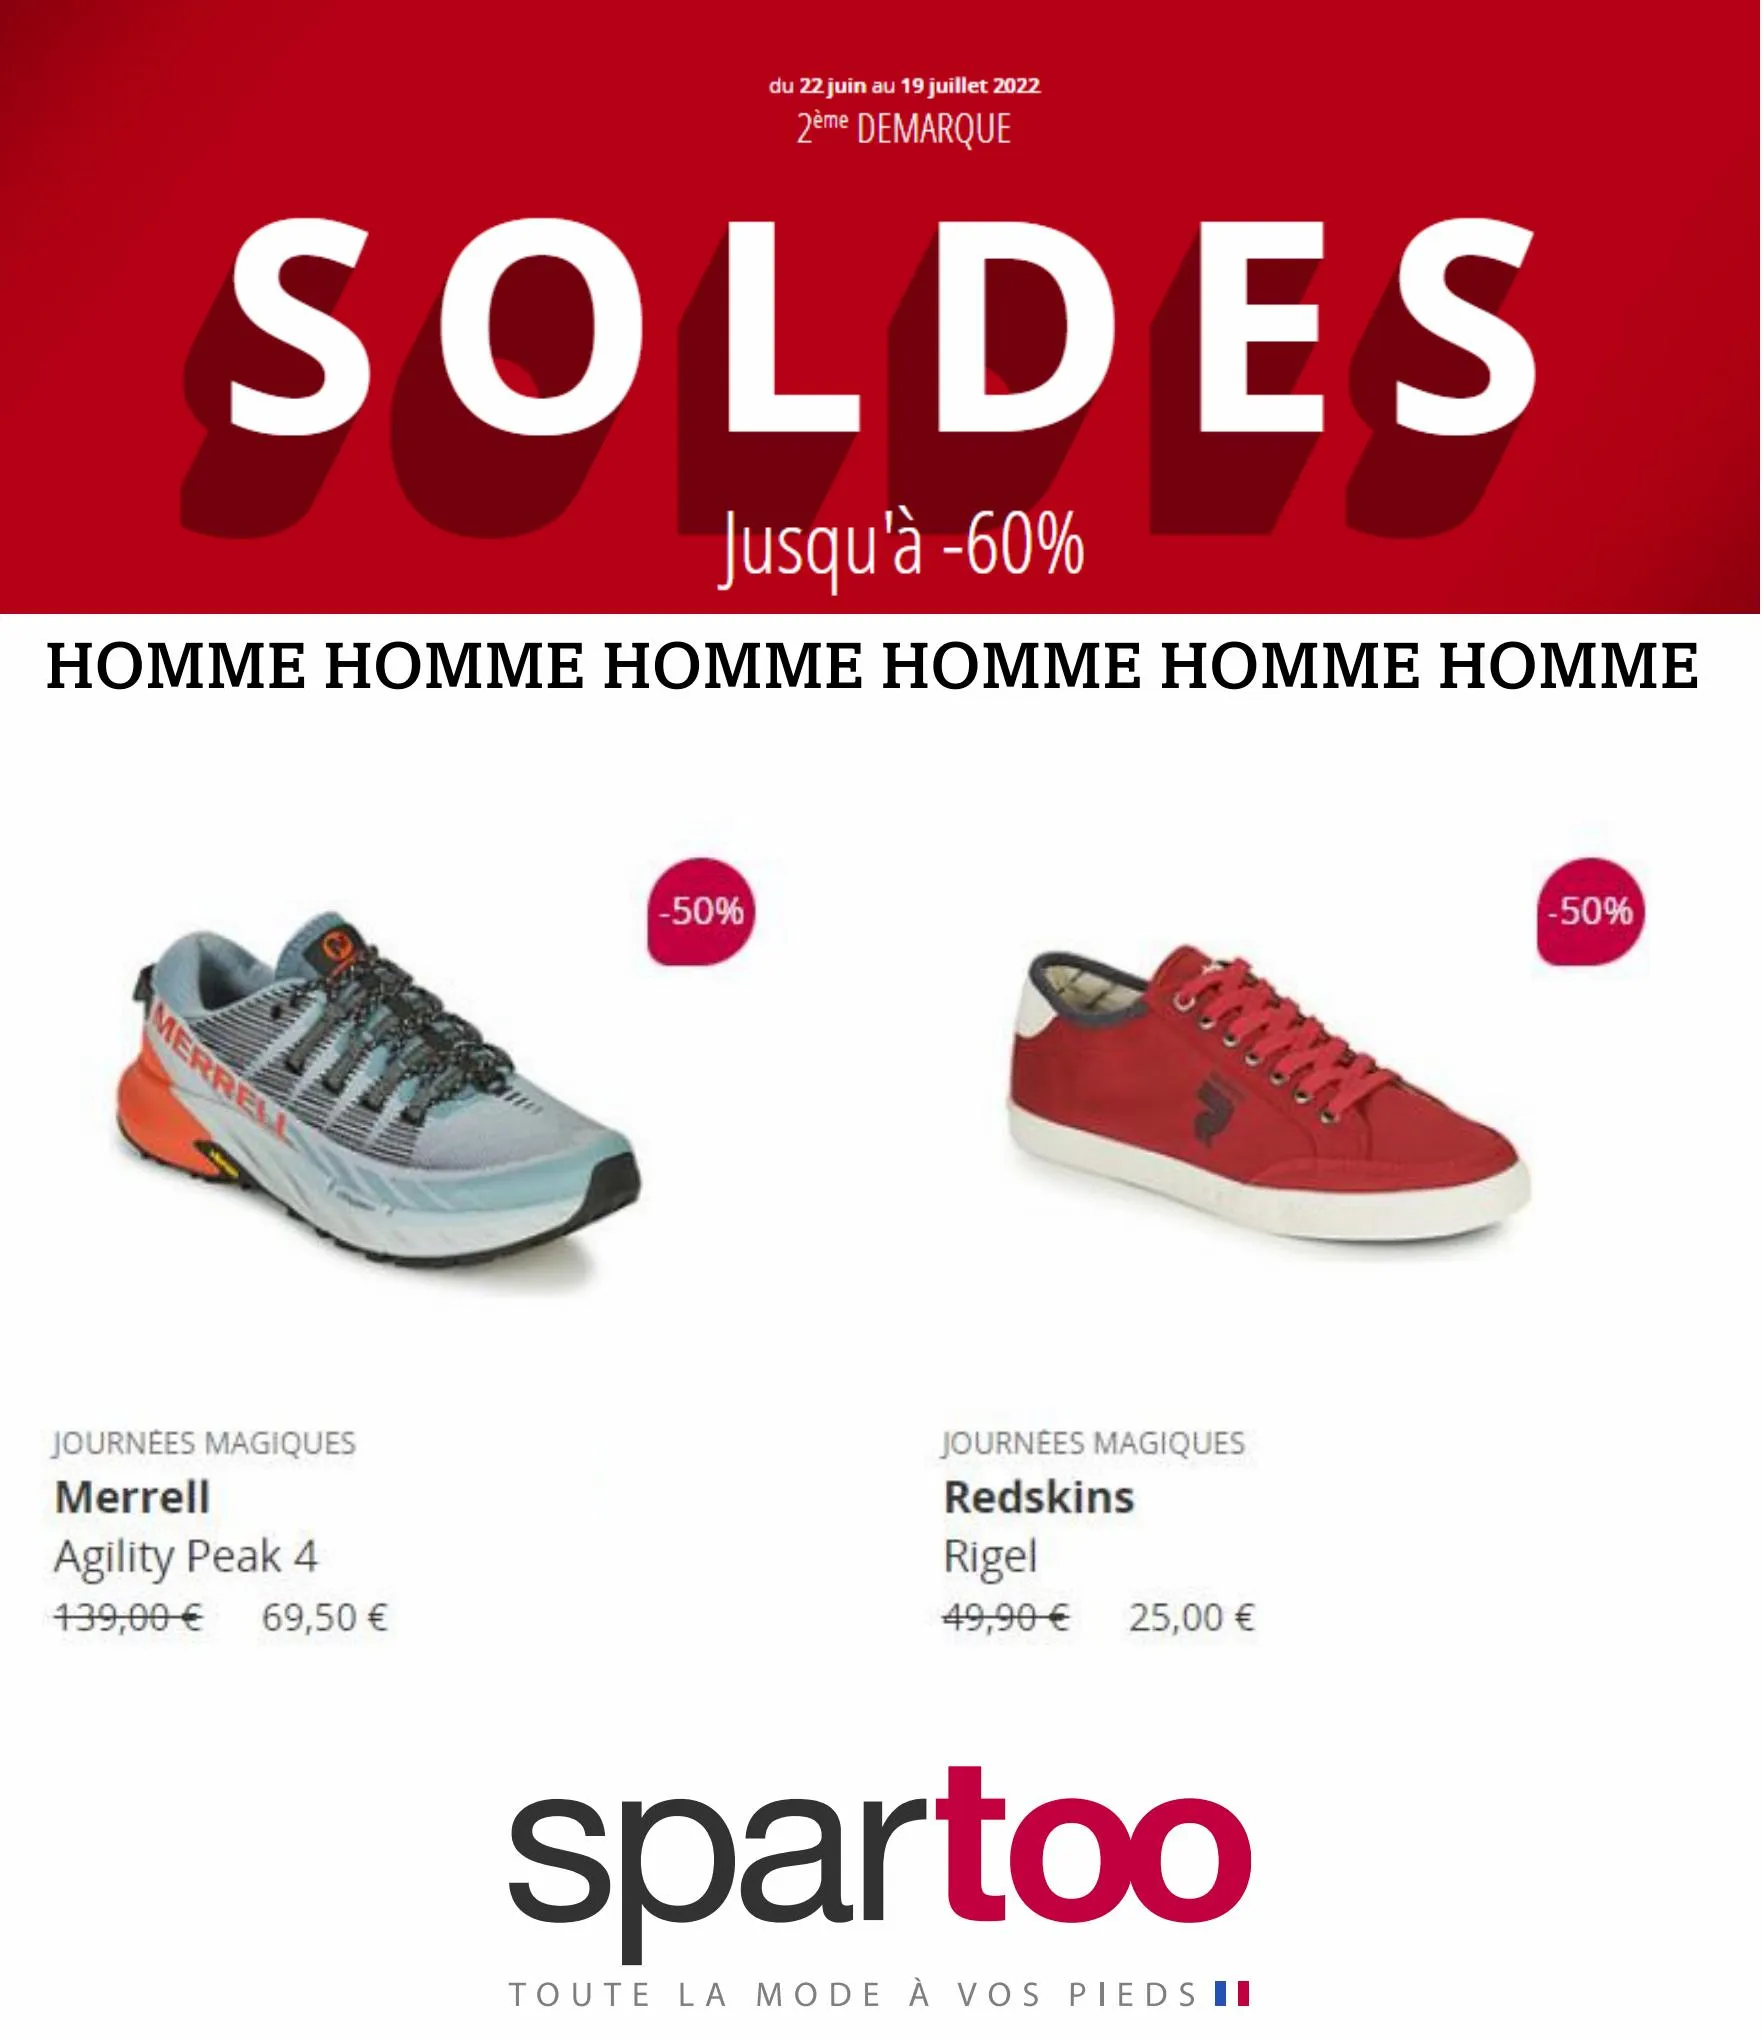 Catalogue SOLDES HOMME -60%, page 00001